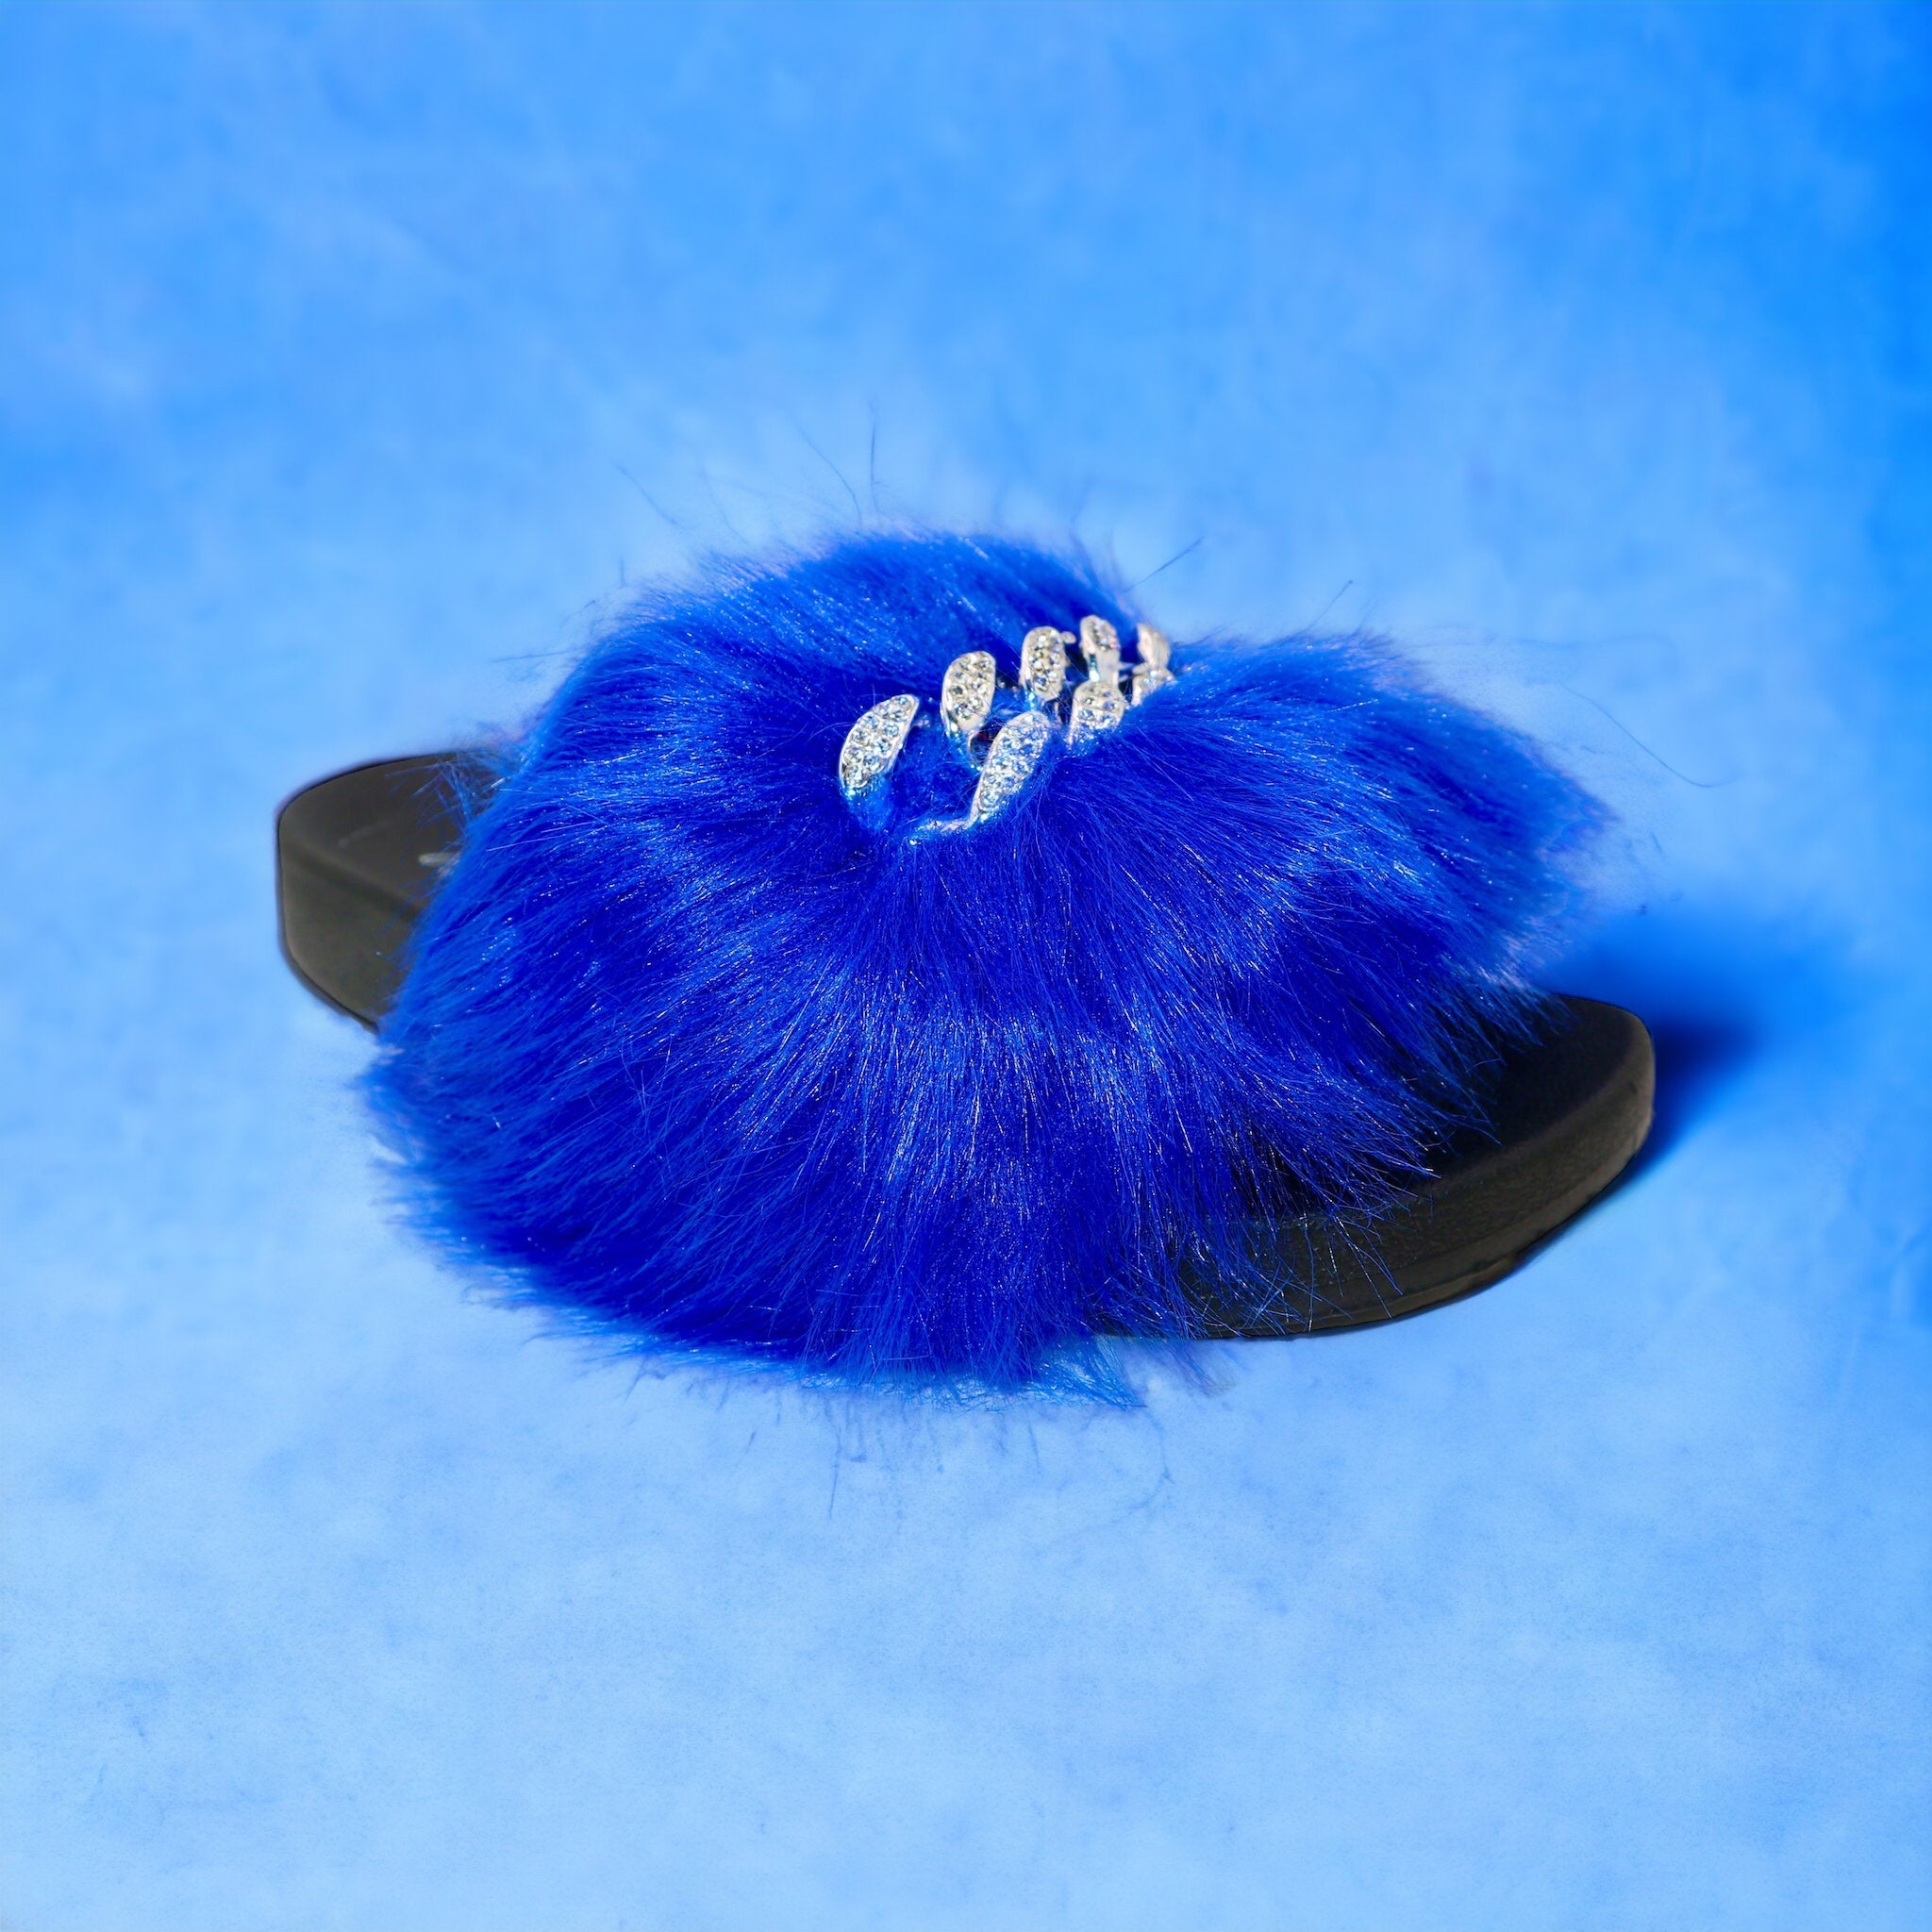 Pupa Slippers Blue